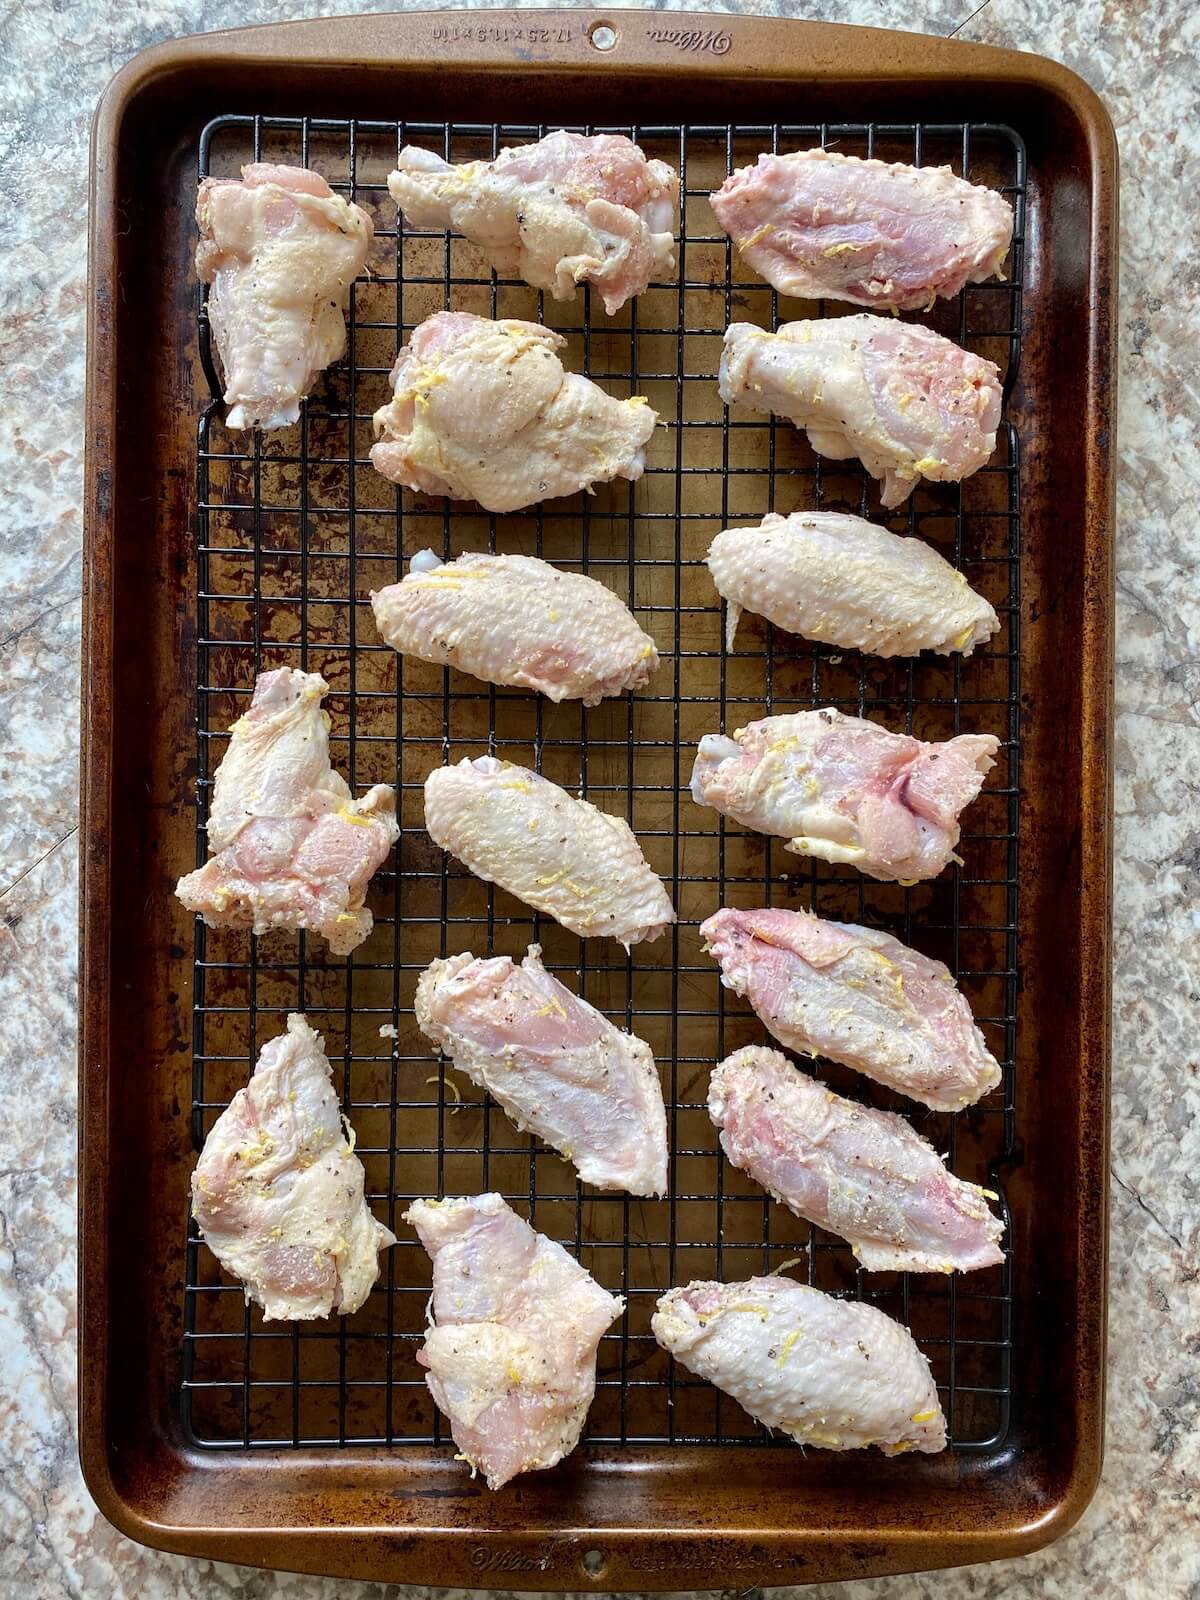 Raw chicken wings coated in baking powder and seasonings placed in a single layer on a wire rack on top of a baking sheet.